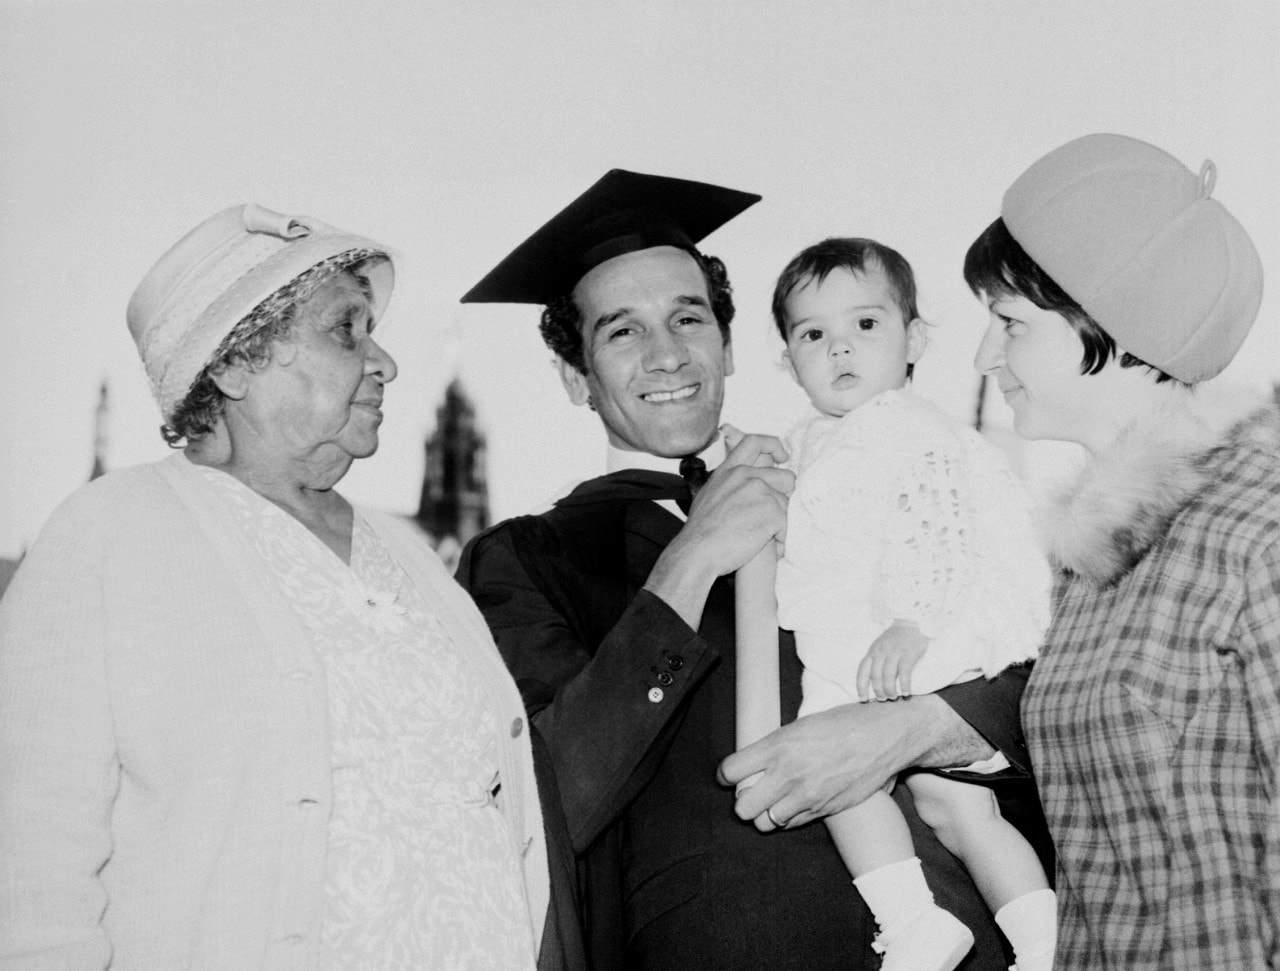 A photo of Charles Perkins and his family on his graduation day, May 1966.